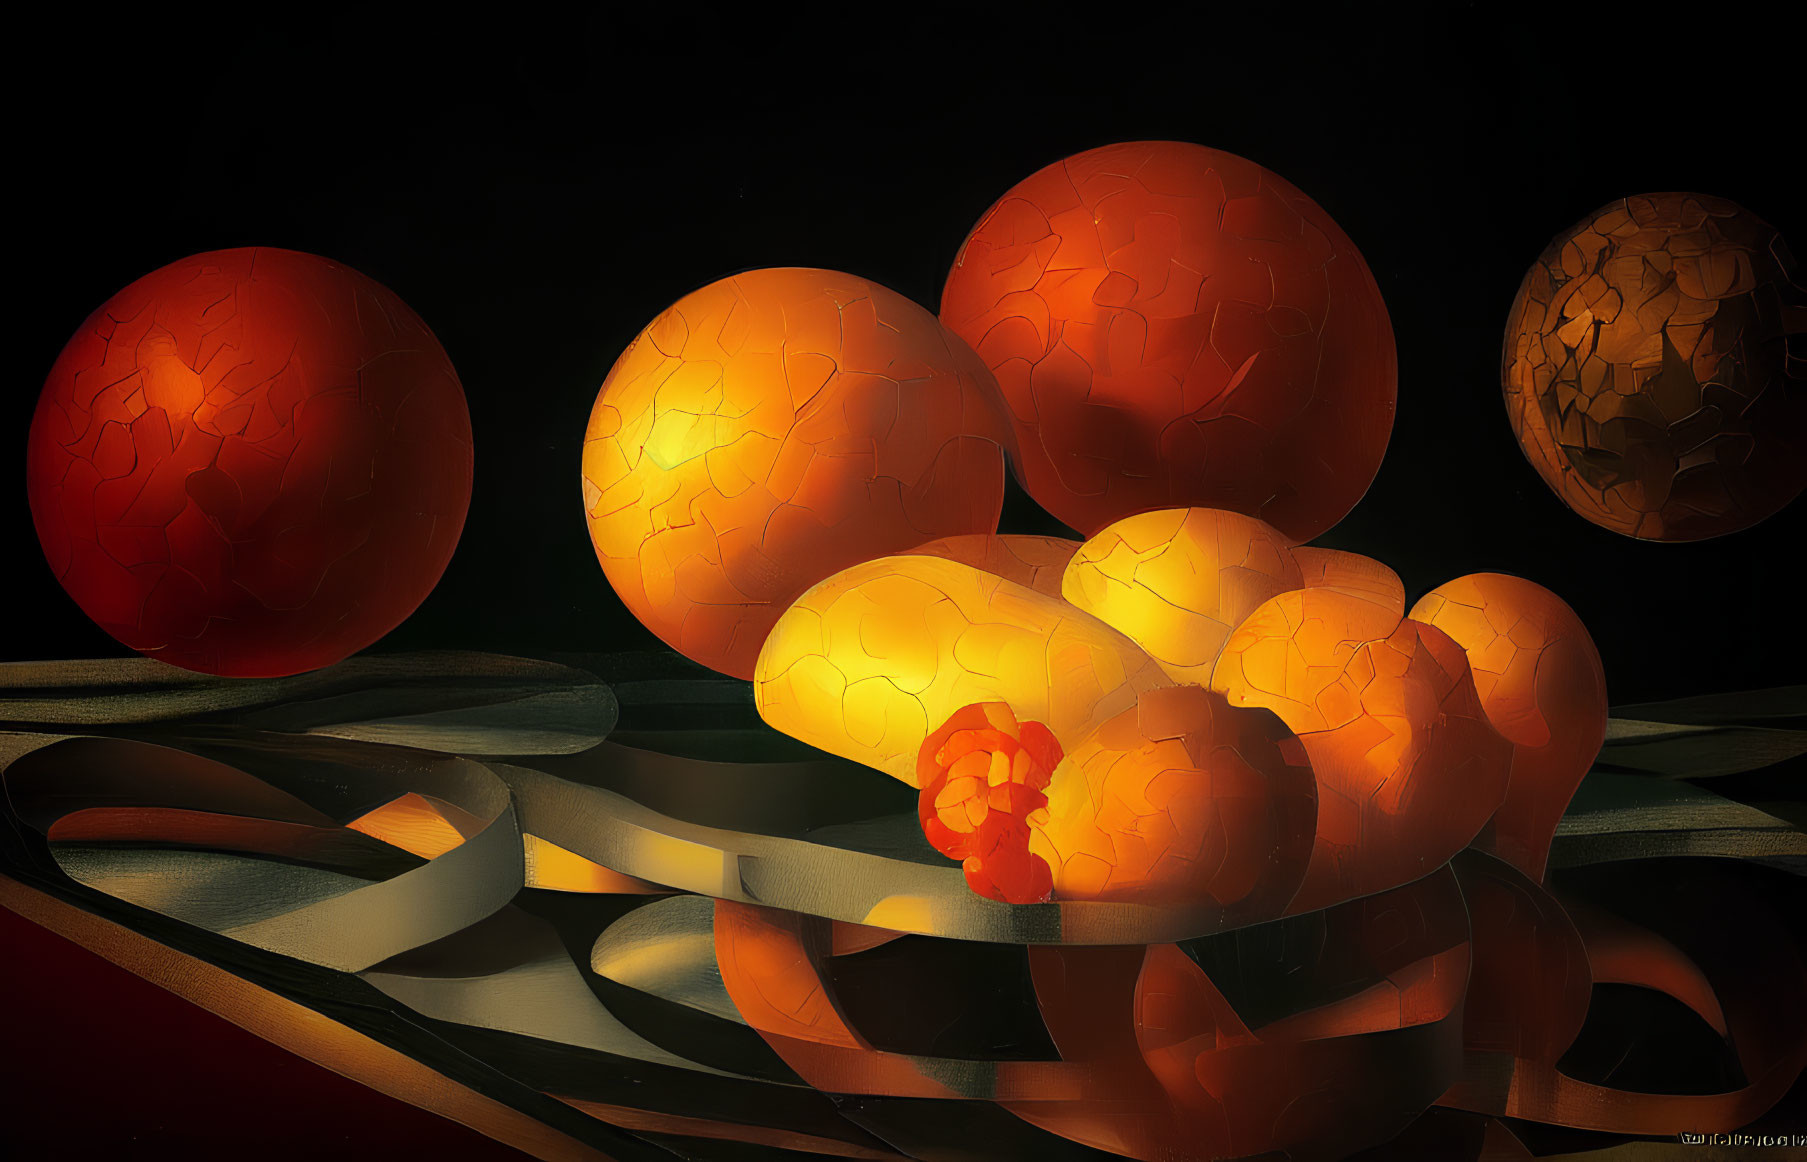 Cracked orange orbs on reflective surface with swirling grey ribbon